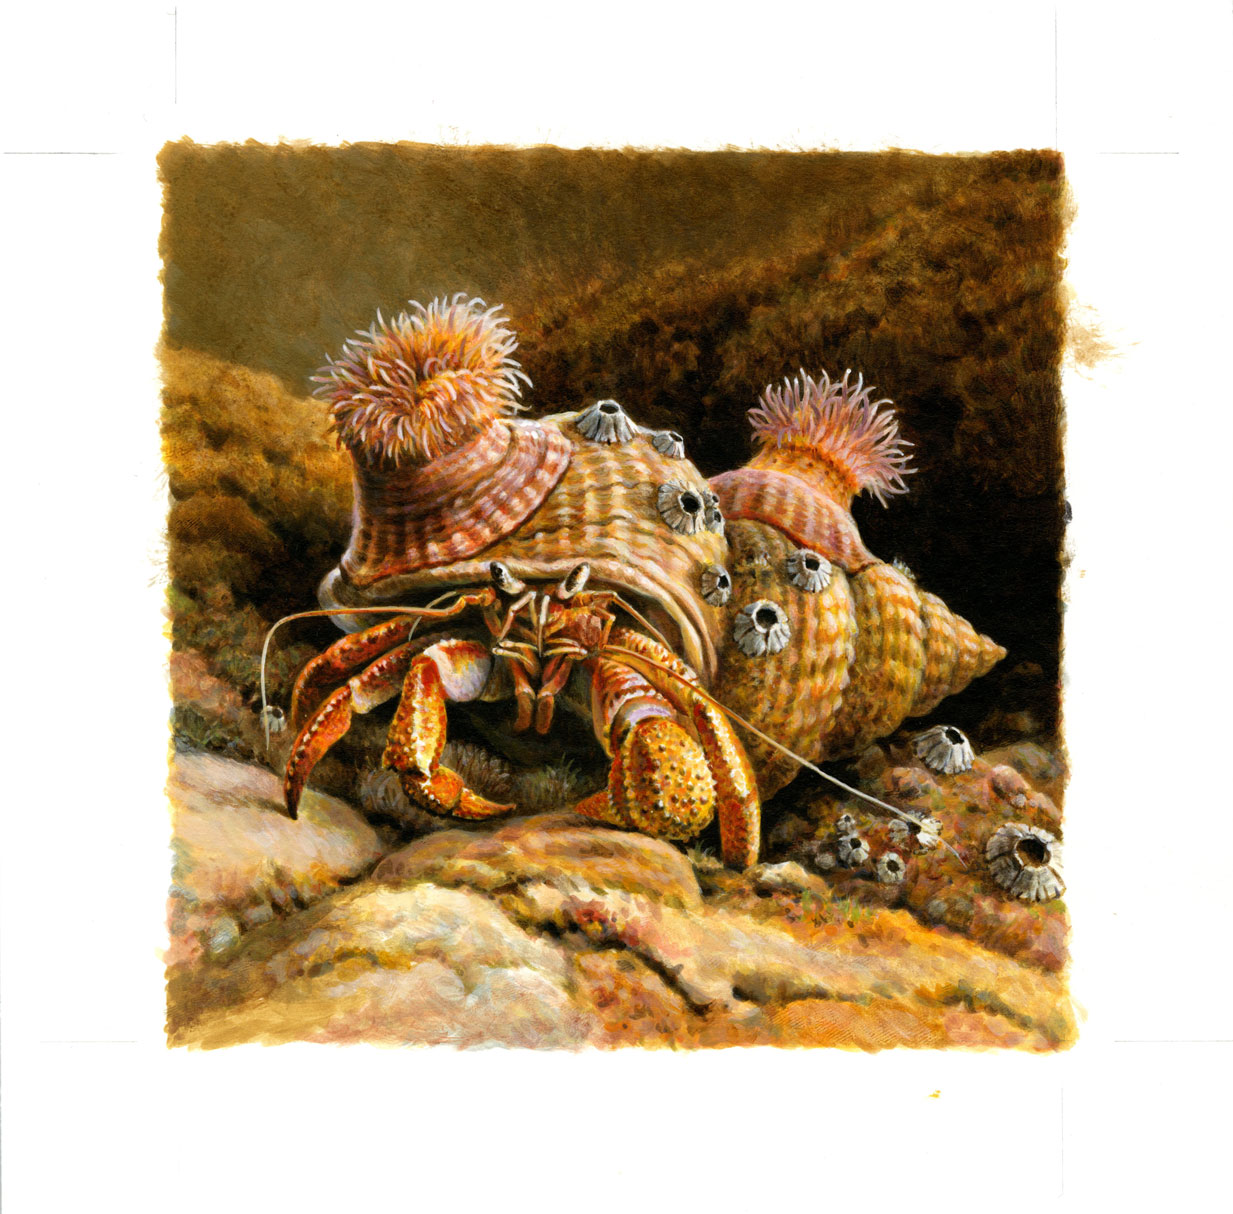 Original unadopted artwork of a Hermit Crab by Andrew Hutchinson for the Sea Life issue 2007